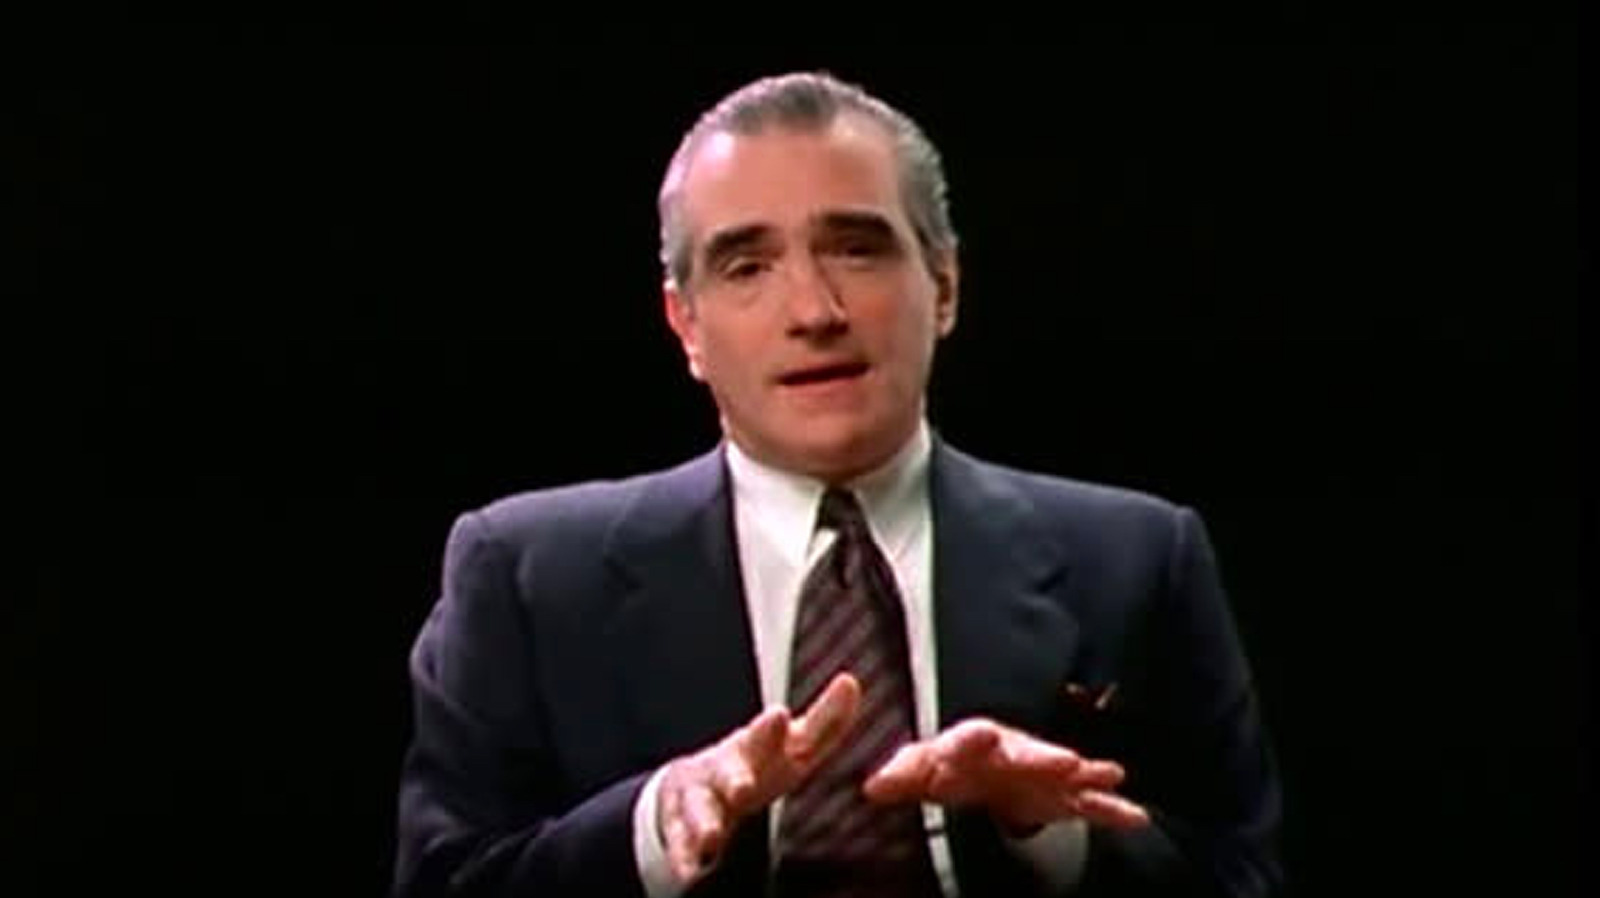 a personal journey with martin scorsese through american movies streaming